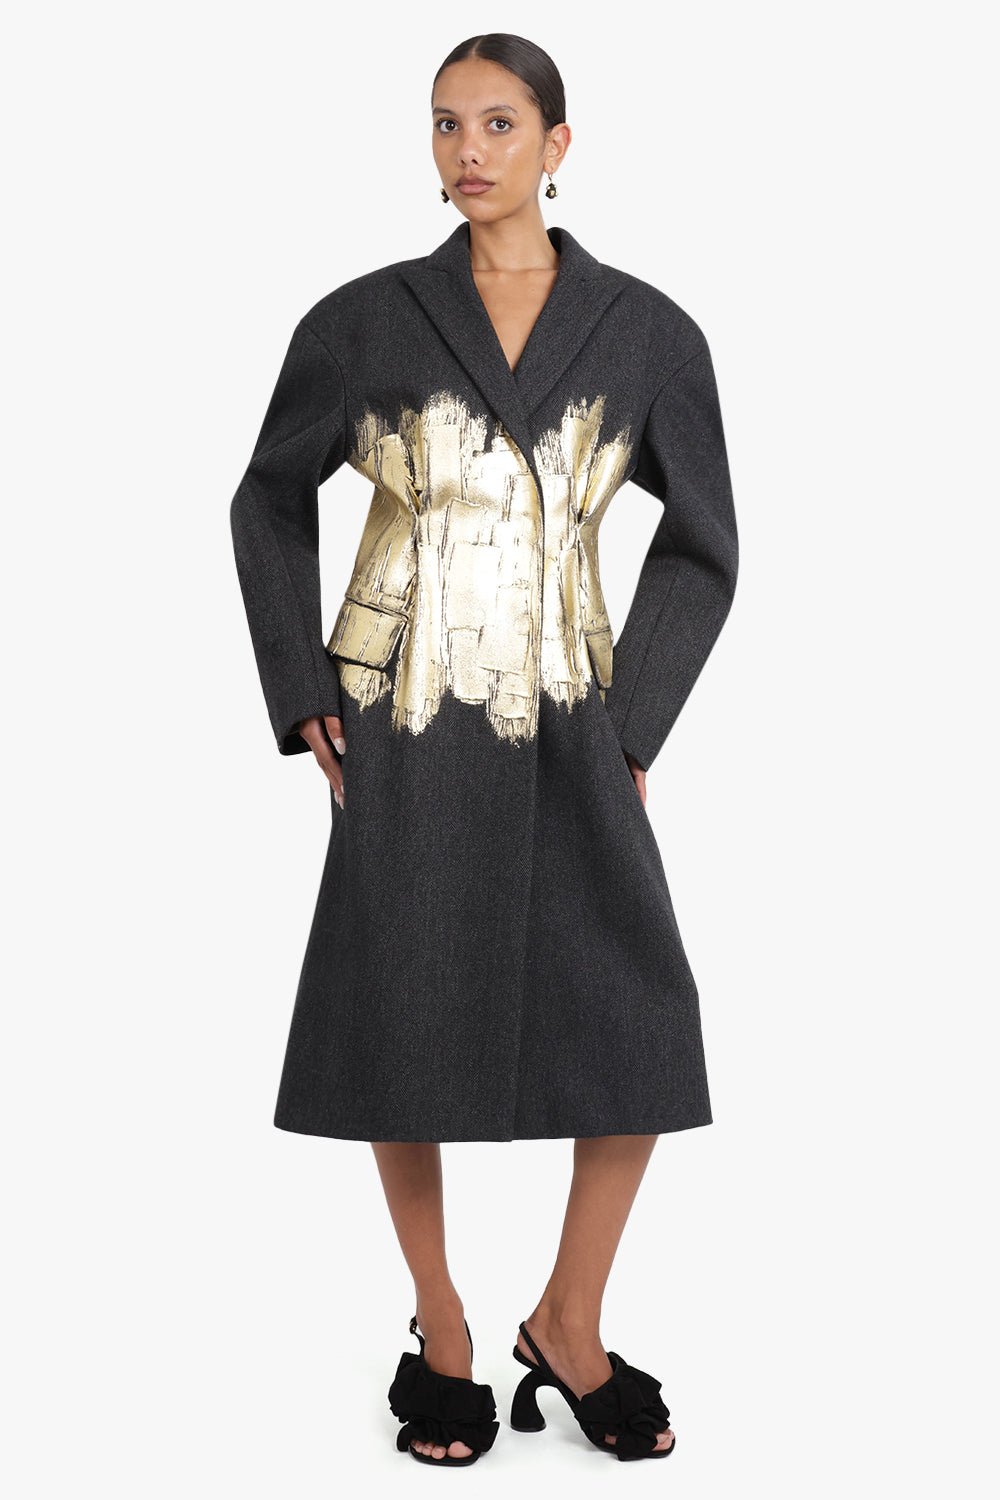 DRIES VAN NOTEN RTW Single Breasted Hand Painted Coat | Anthracite